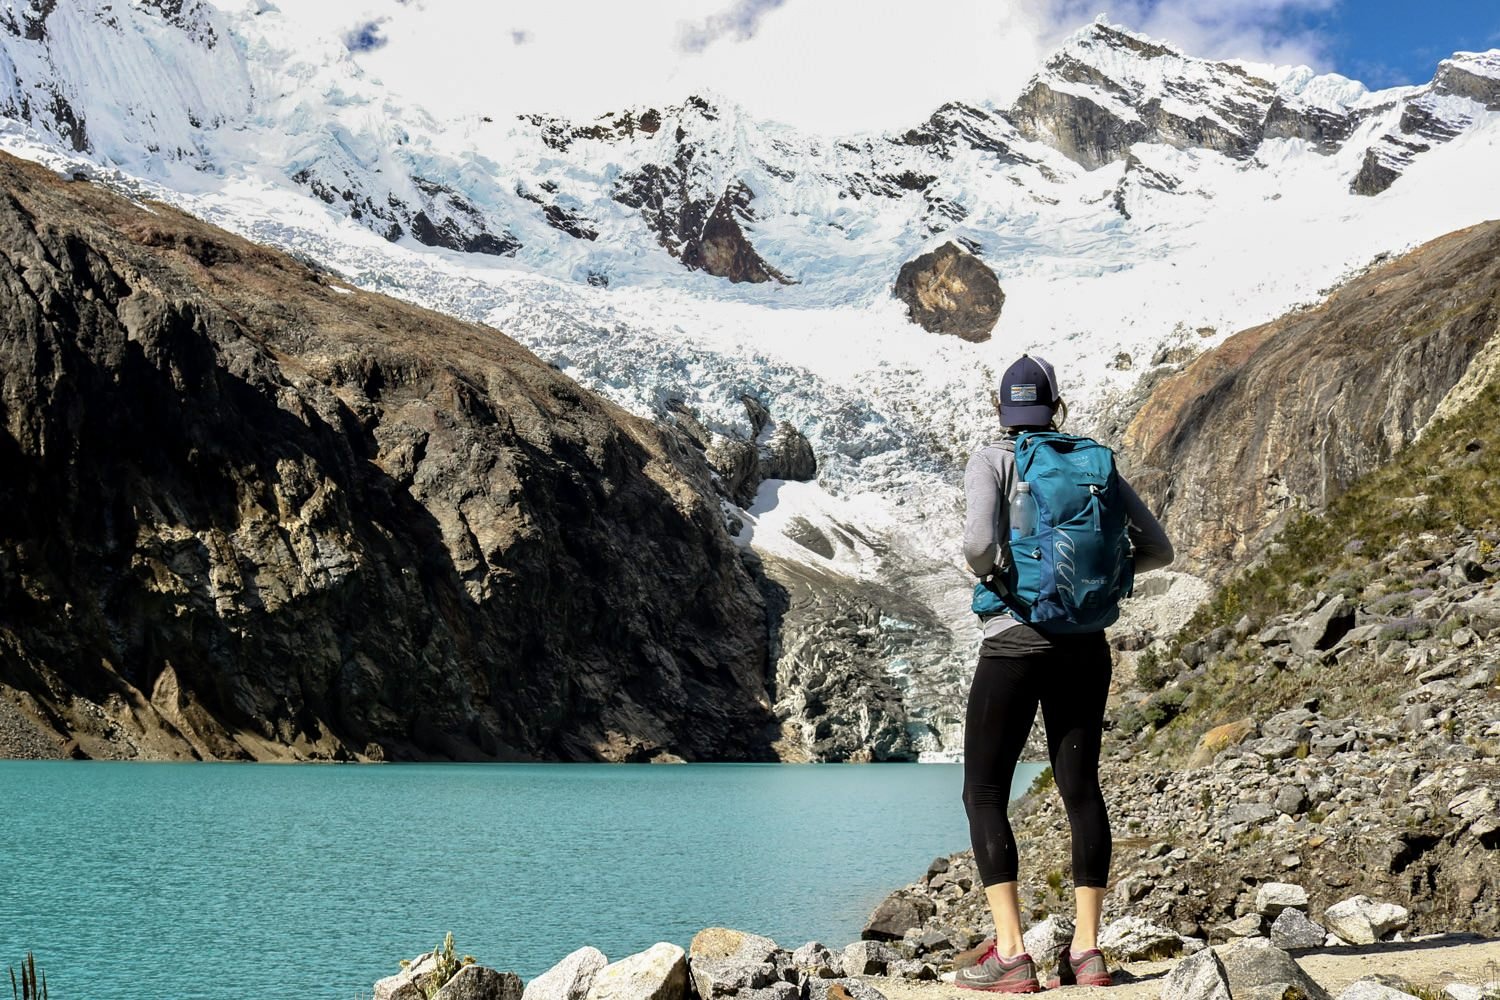 A hiker looking up at a glacier near a turquoise lake wearing the Osprey Tempest 20 backpack